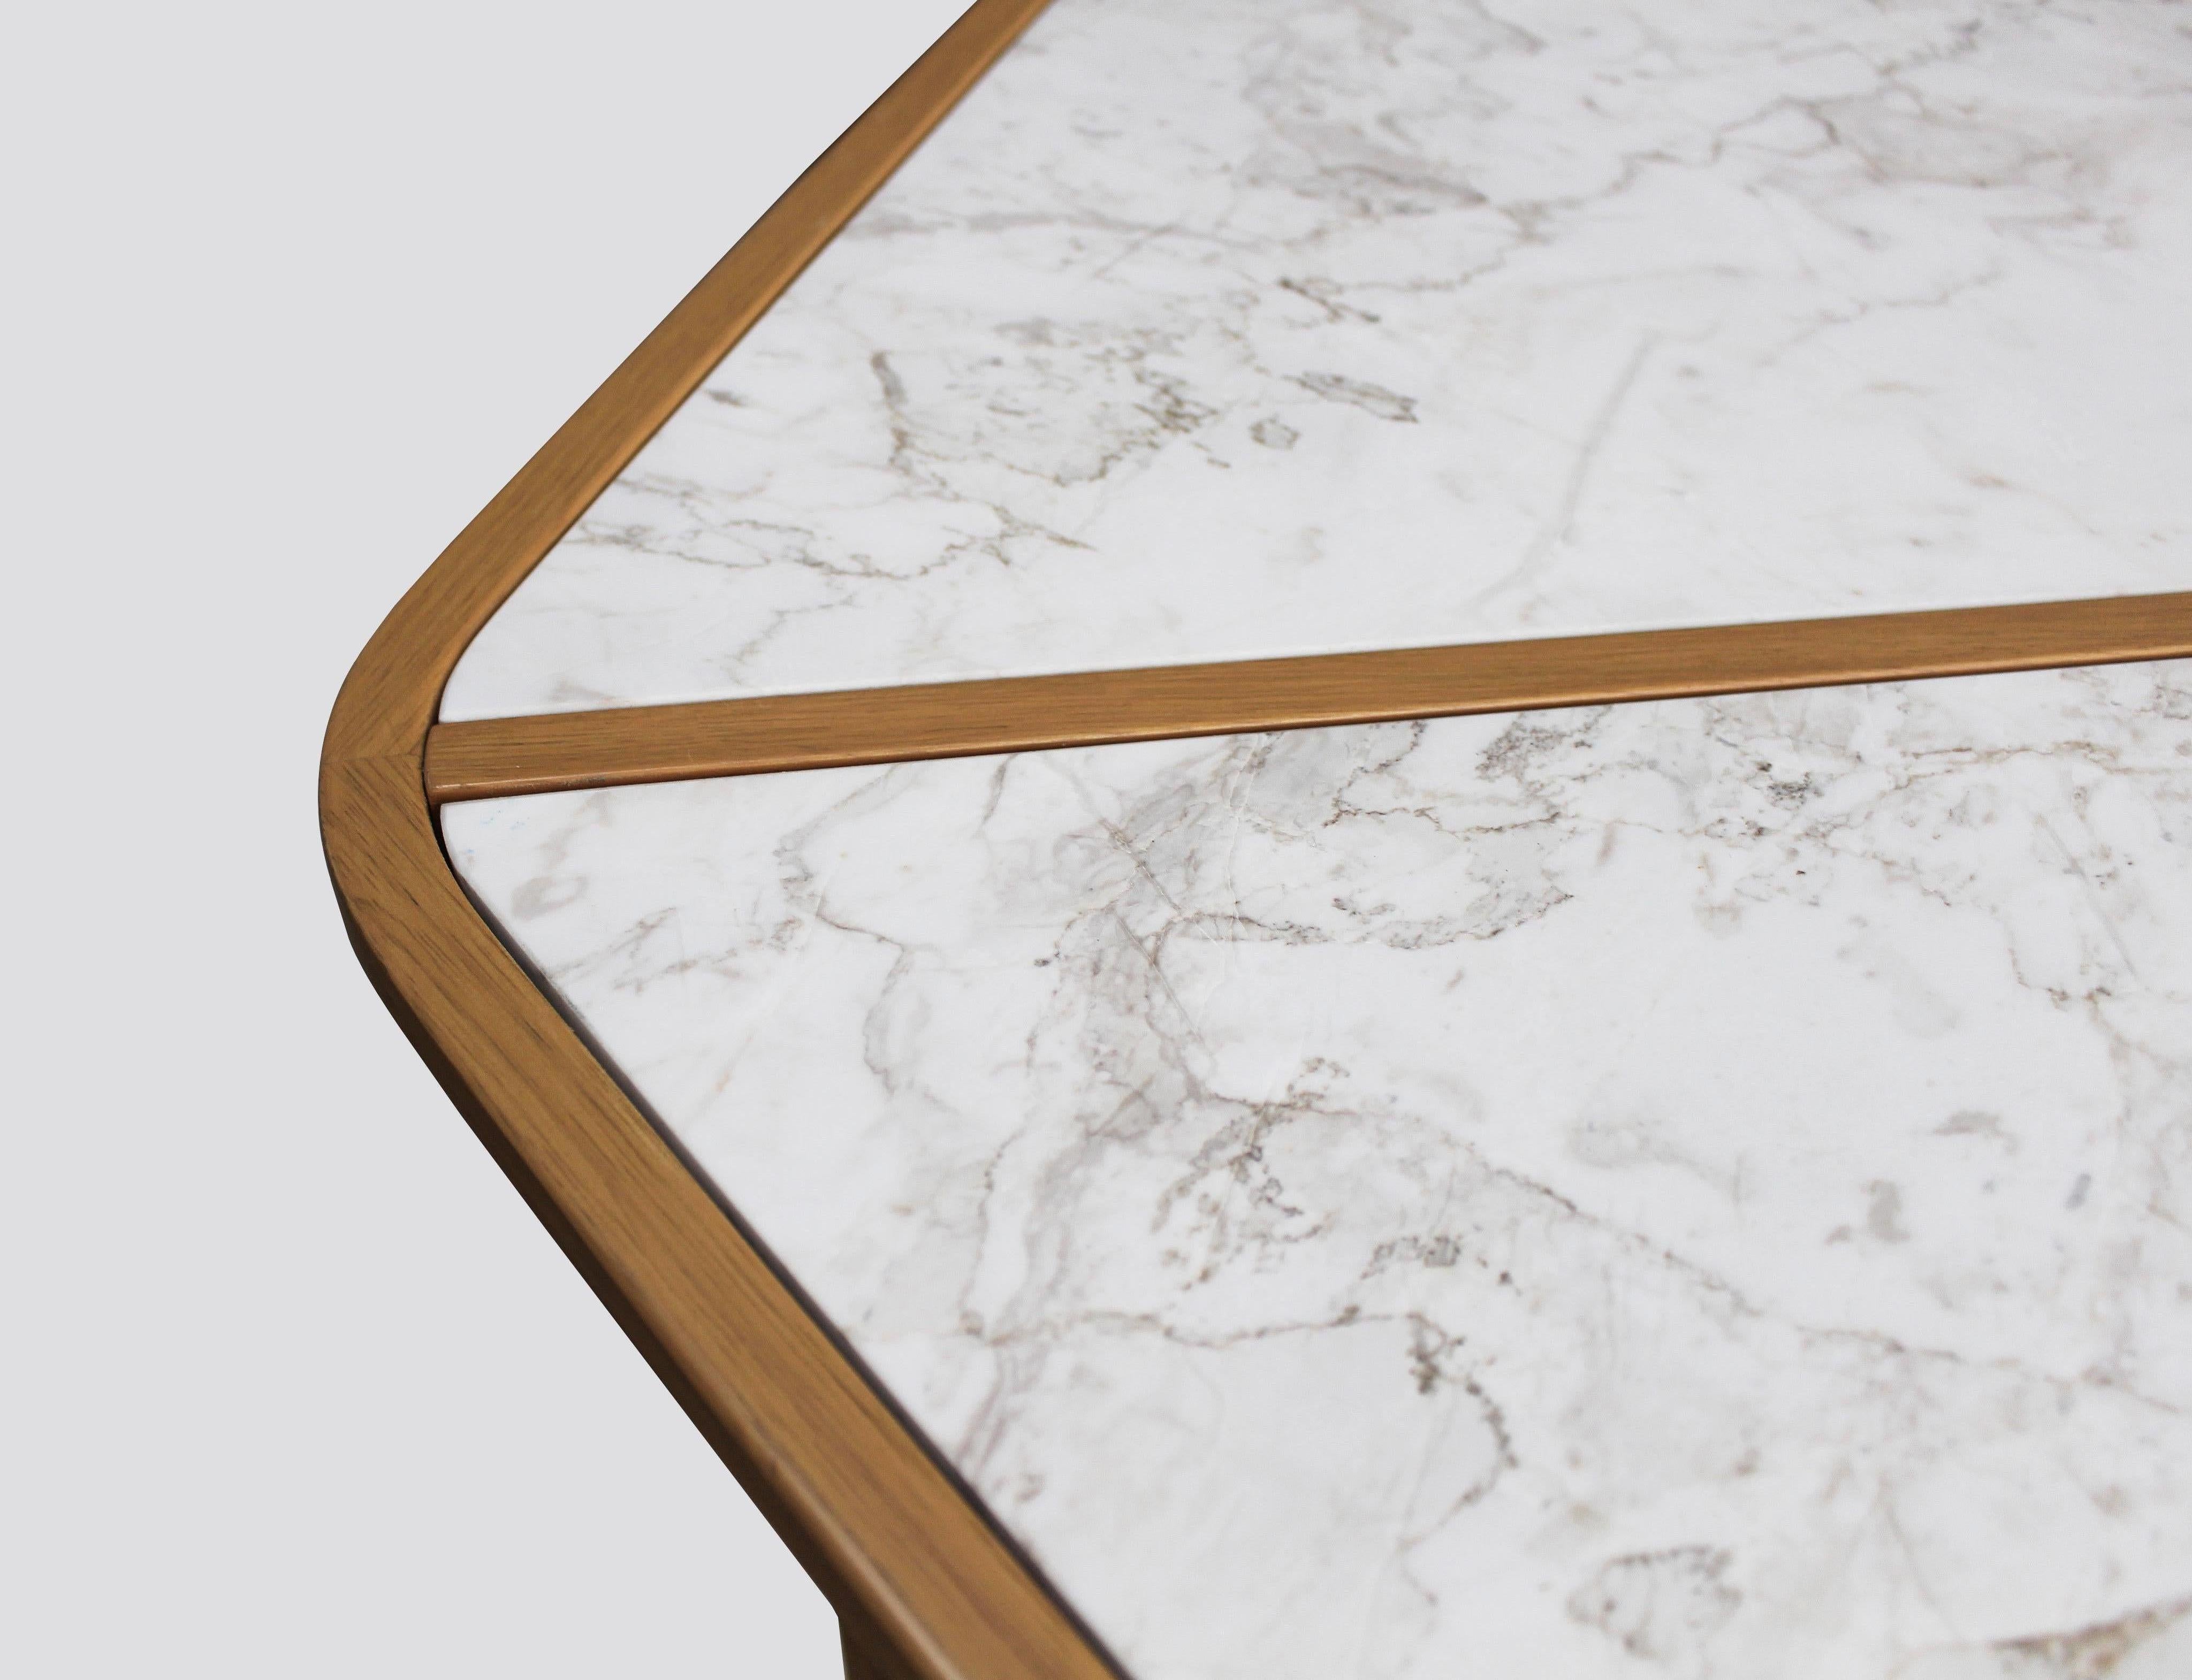 Evolve dining table for marbleous by Buket Hos¸can Bazman
2017
Dimensions: W 125, D 140, H 75 cm
Material: Oak wood and patinated marble

Buket Hoscan Bazman was born in Izmir, Turkey, in 1989. Graduated at the Isik University and after few years of